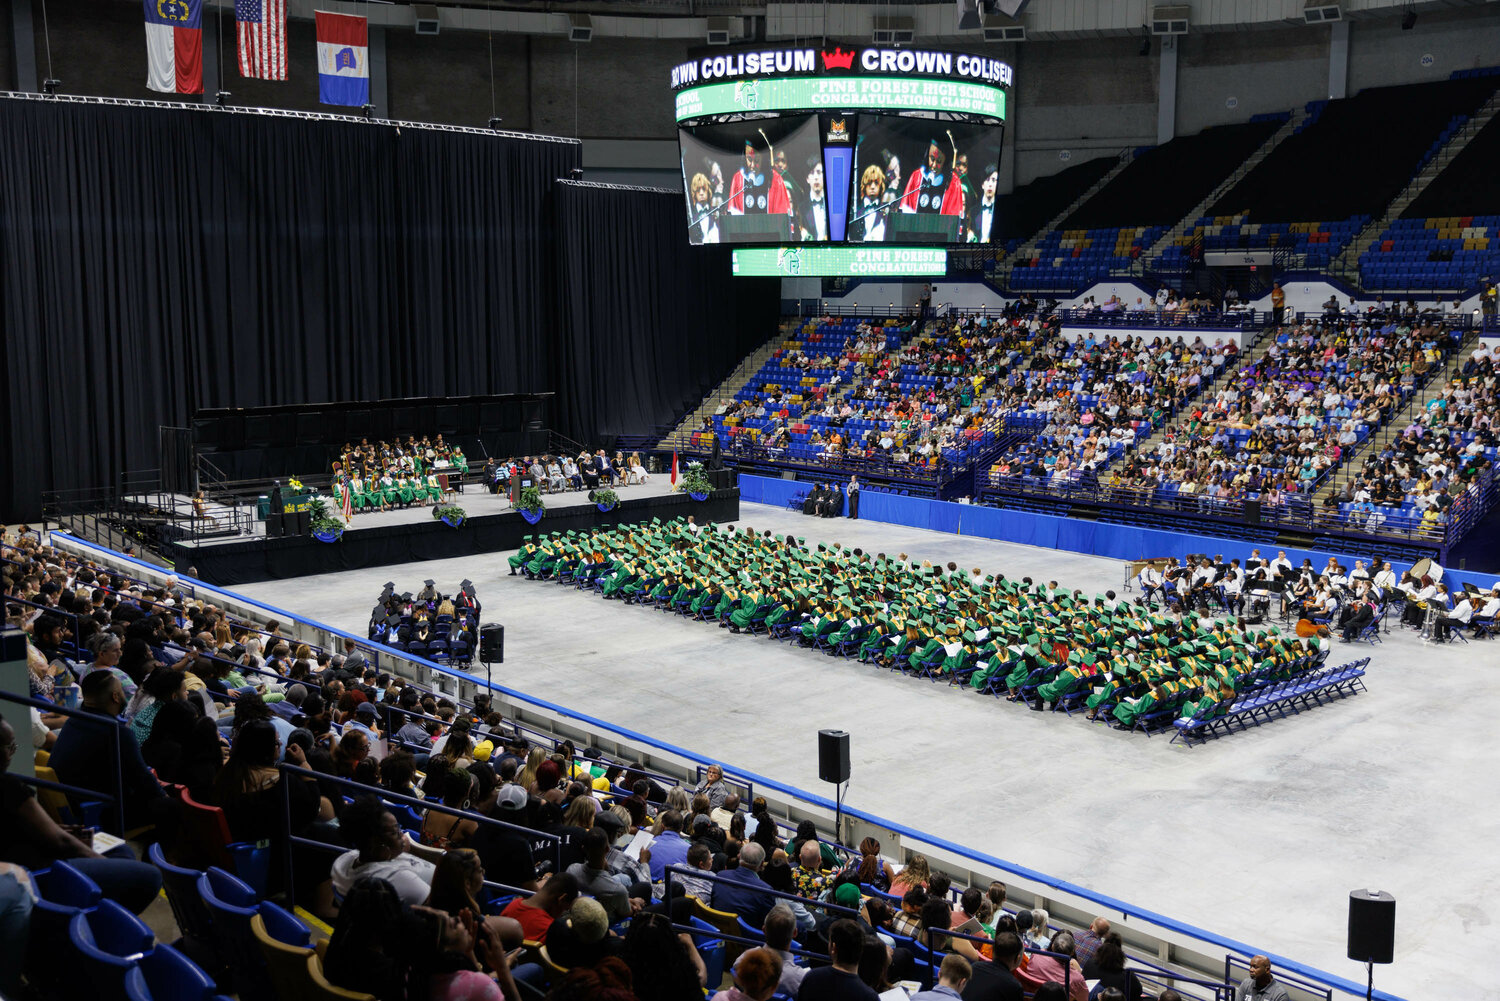 Pine Forest High School celebrates graduation at commencement Monday in the Crown Coliseum.